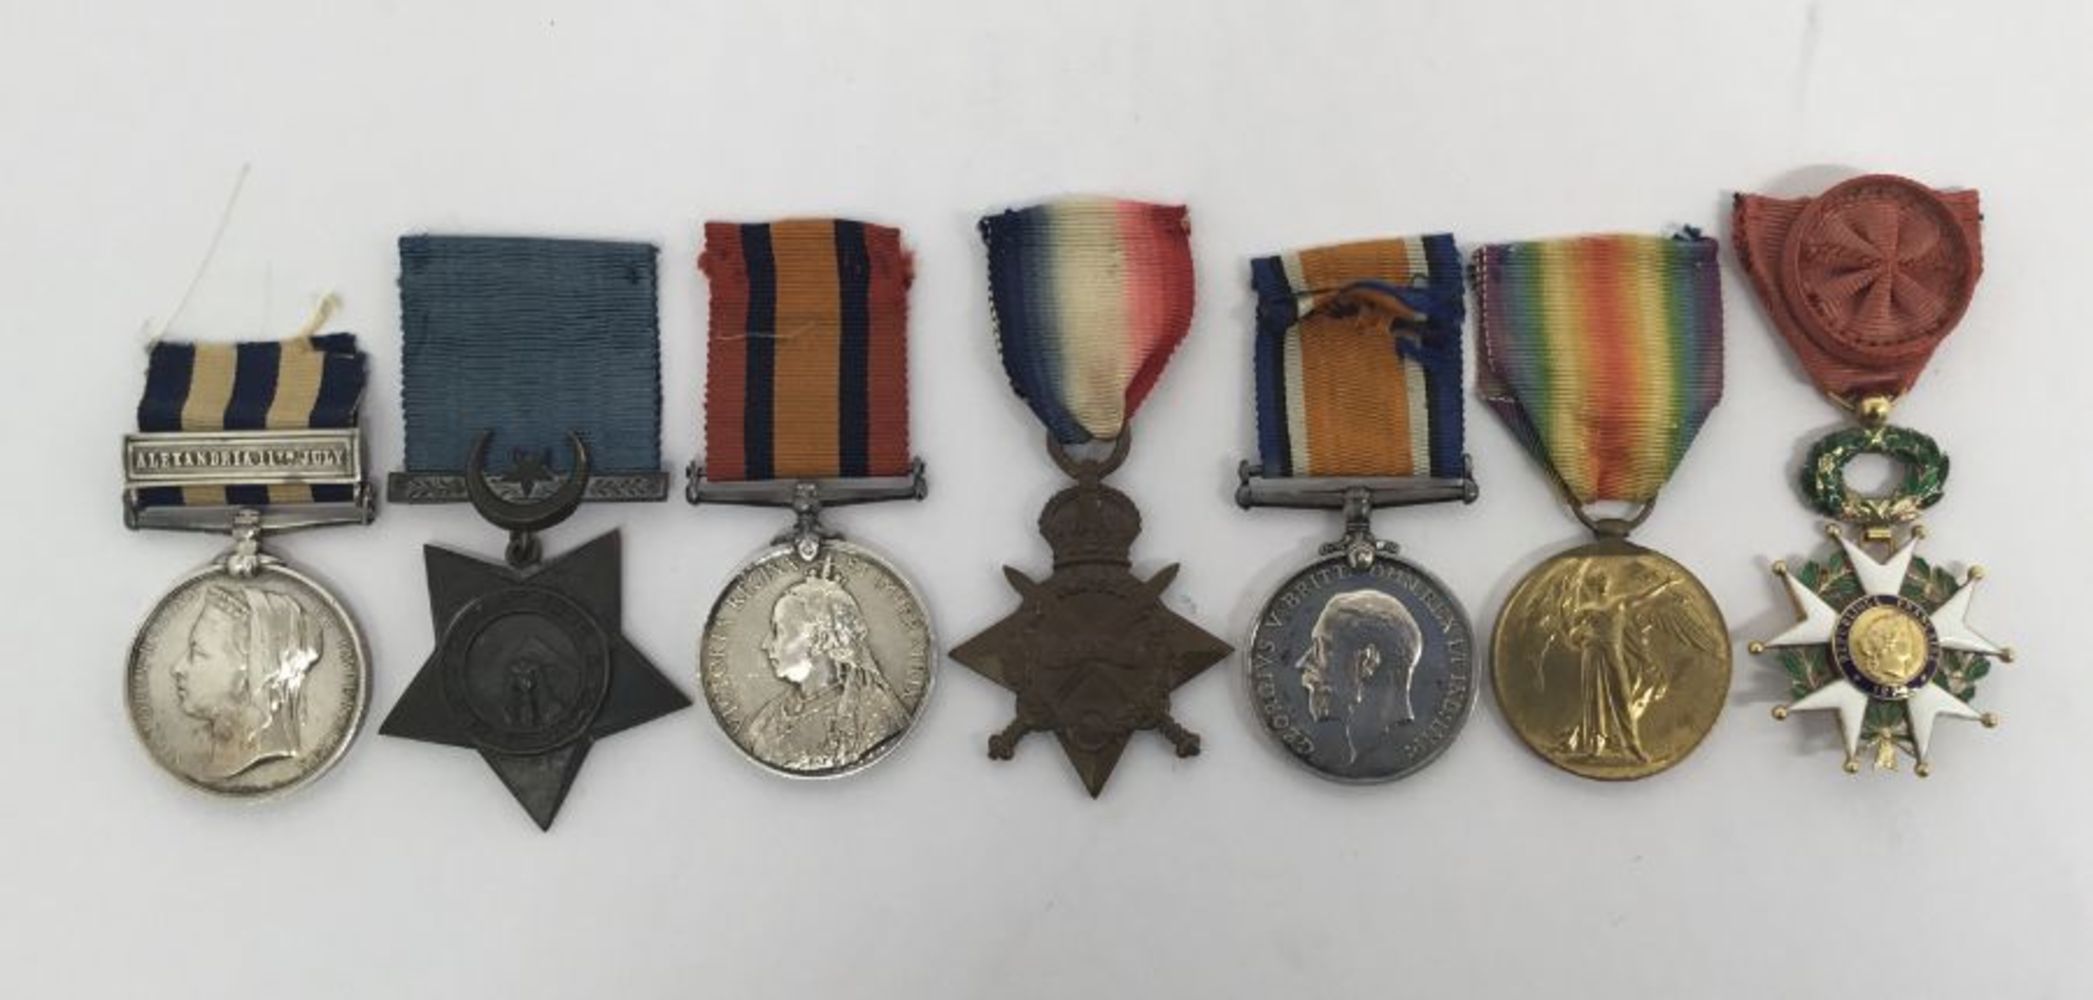 June Medals & Militaria Auction - Viewing by Appointment - Live Web Broadcast & Bidding - Postage and Safe Click/Collect Only